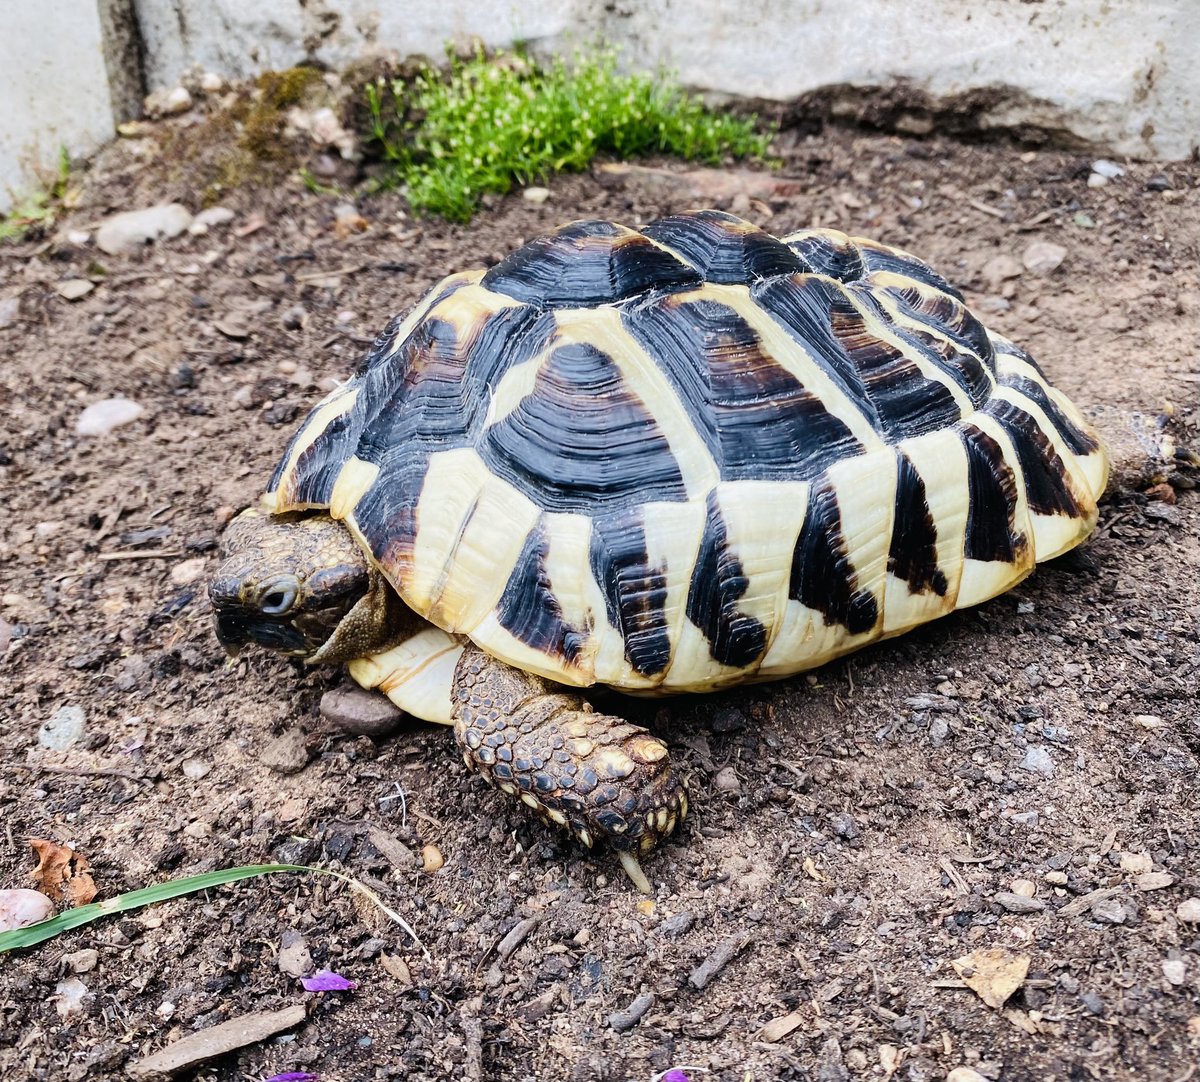 Rescued this little Tort a week ago, she is in bad shape with Metabolic Bone Disease. Daily injections, baths and general tlc, hoping she will pull through. The result of poor animal husbandry, the wrong environment and diet.